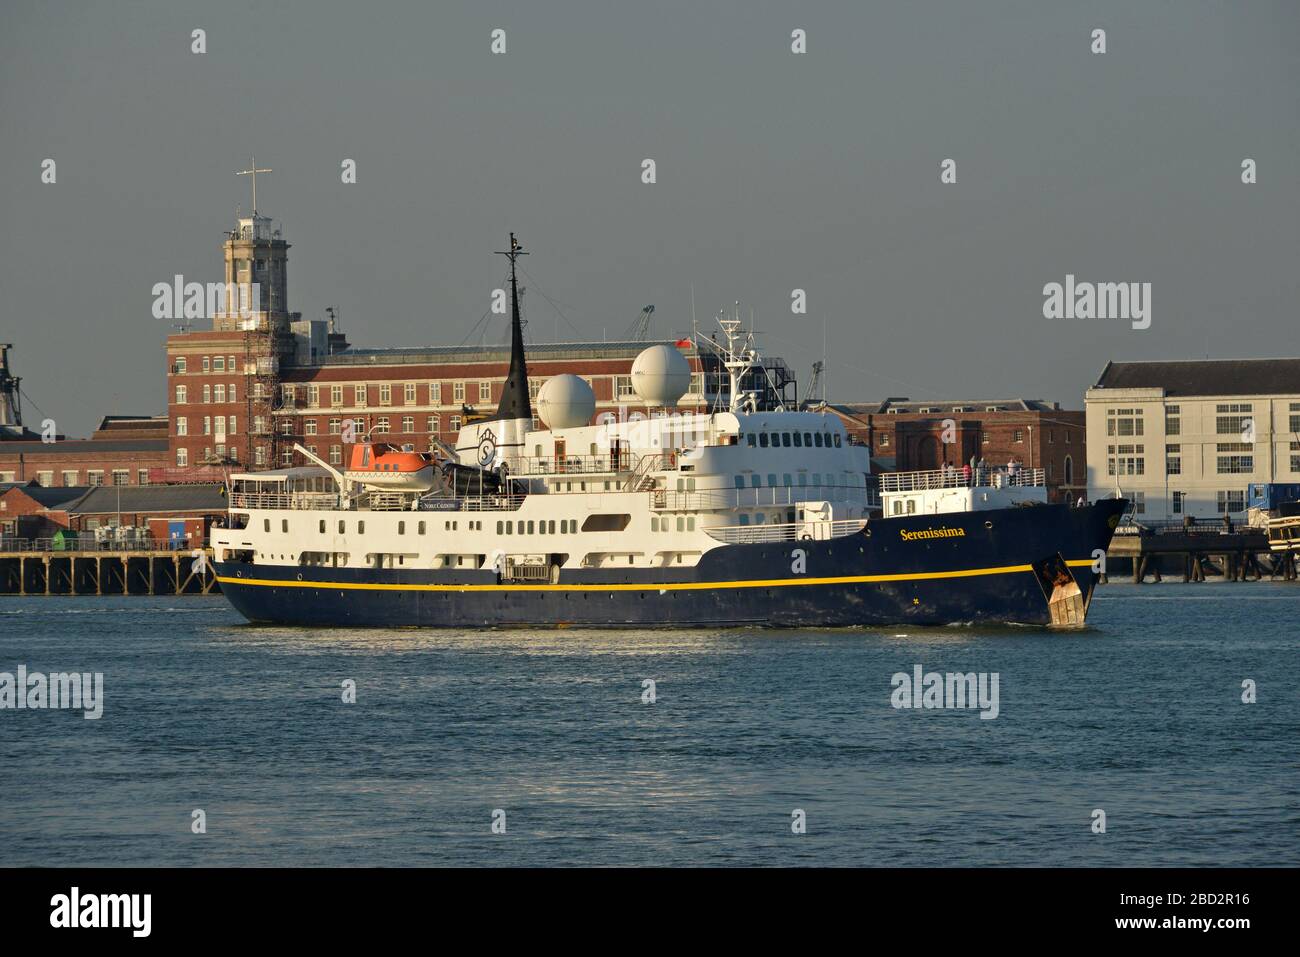 SERENISSIMA departing from Portsmouth Harbour with the historic dockyard buildings beyond. Stock Photo